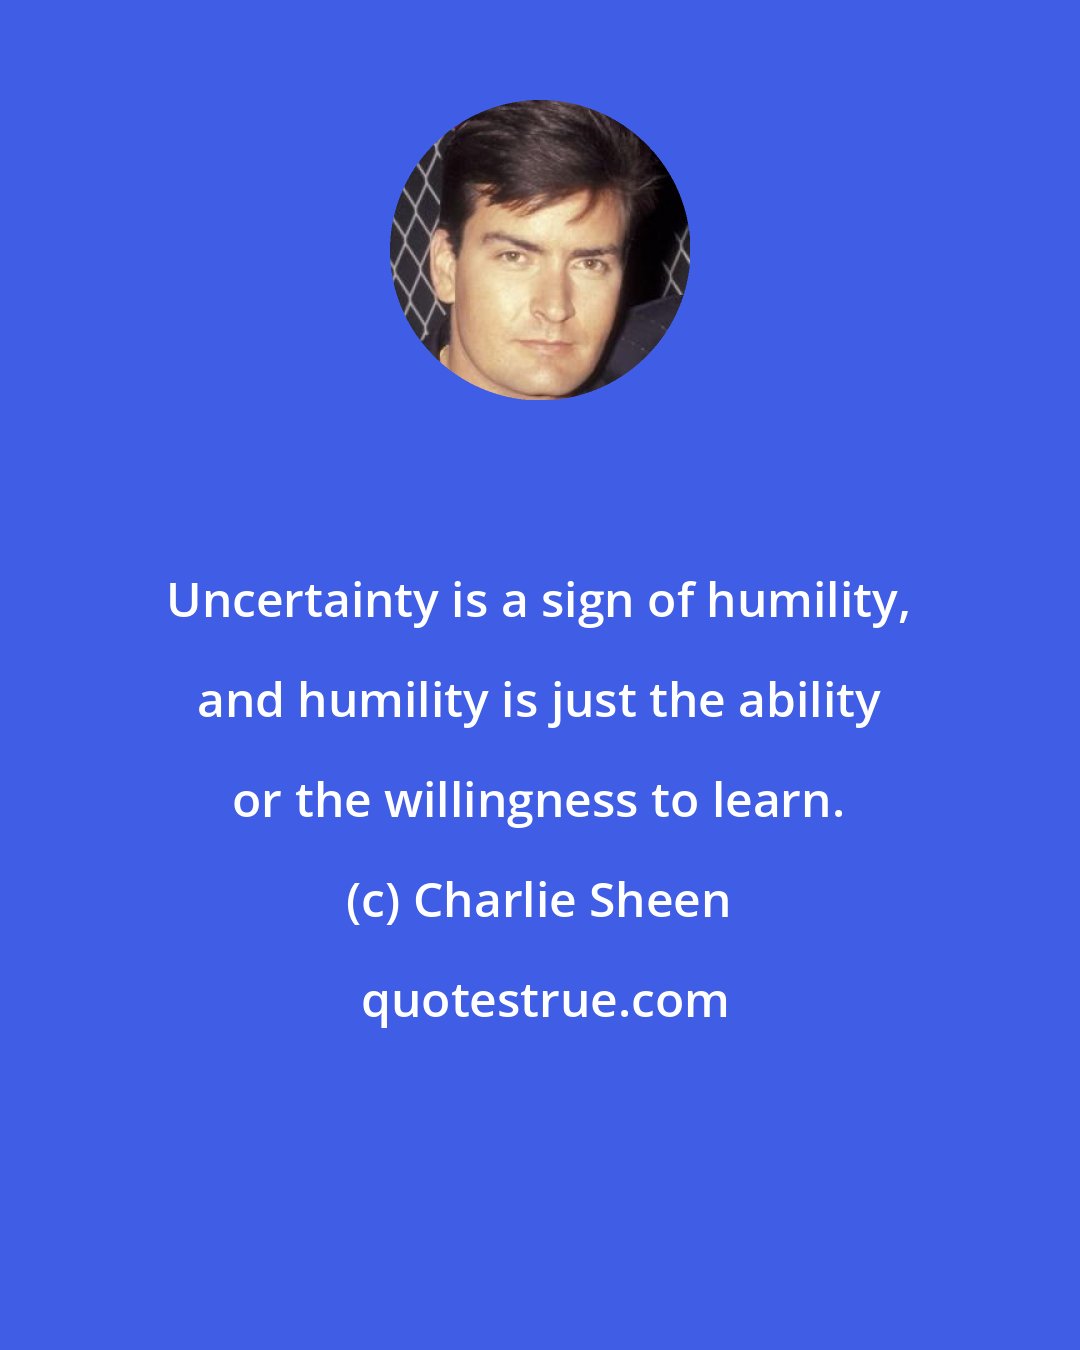 Charlie Sheen: Uncertainty is a sign of humility, and humility is just the ability or the willingness to learn.